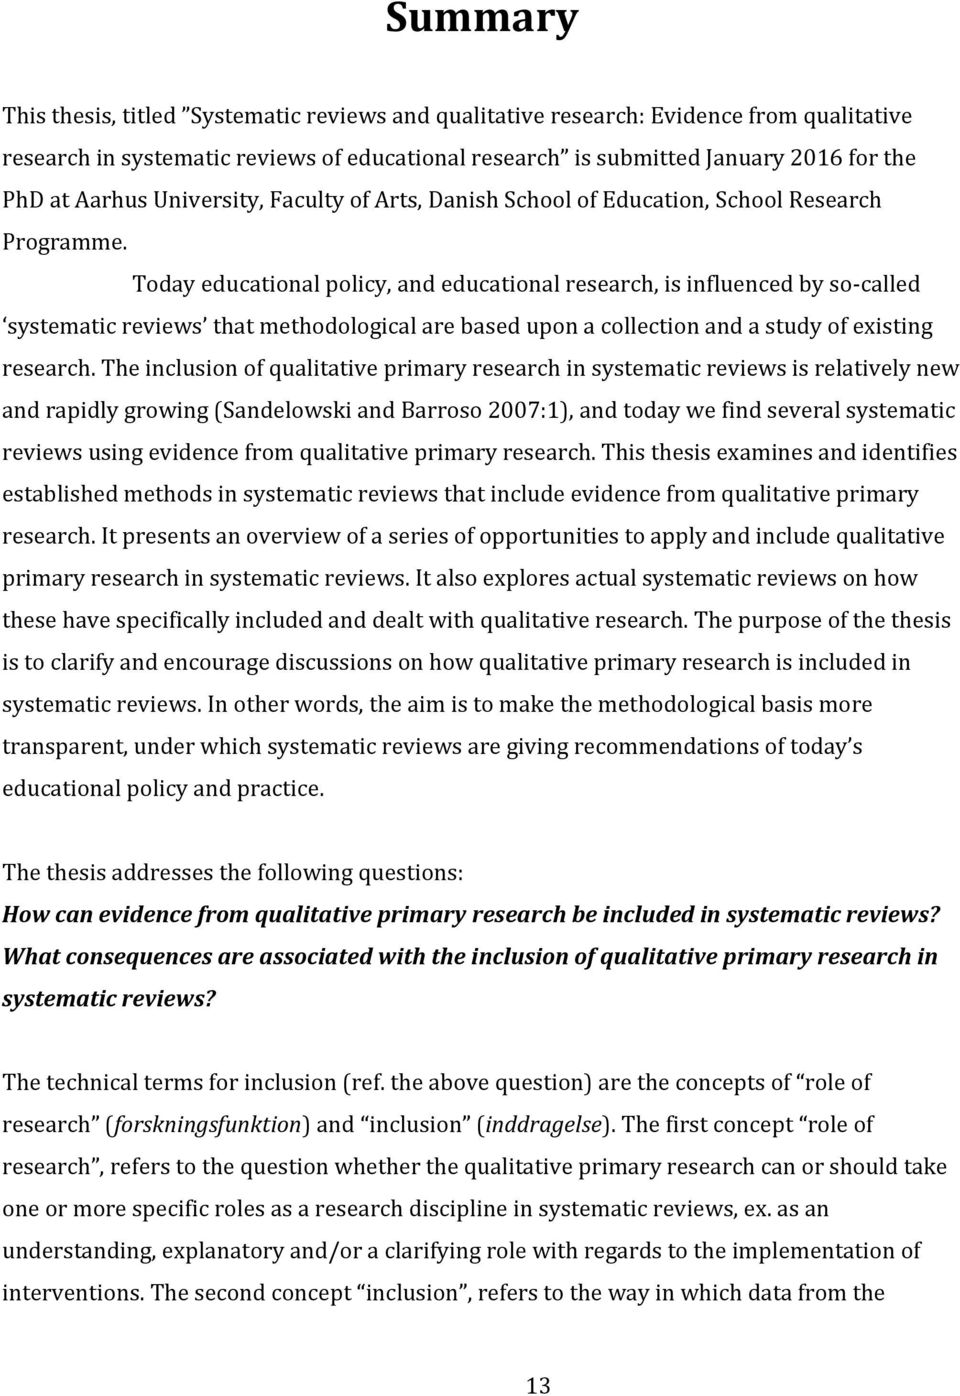 Today educational policy, and educational research, is influenced by so-called systematic reviews that methodological are based upon a collection and a study of existing research.